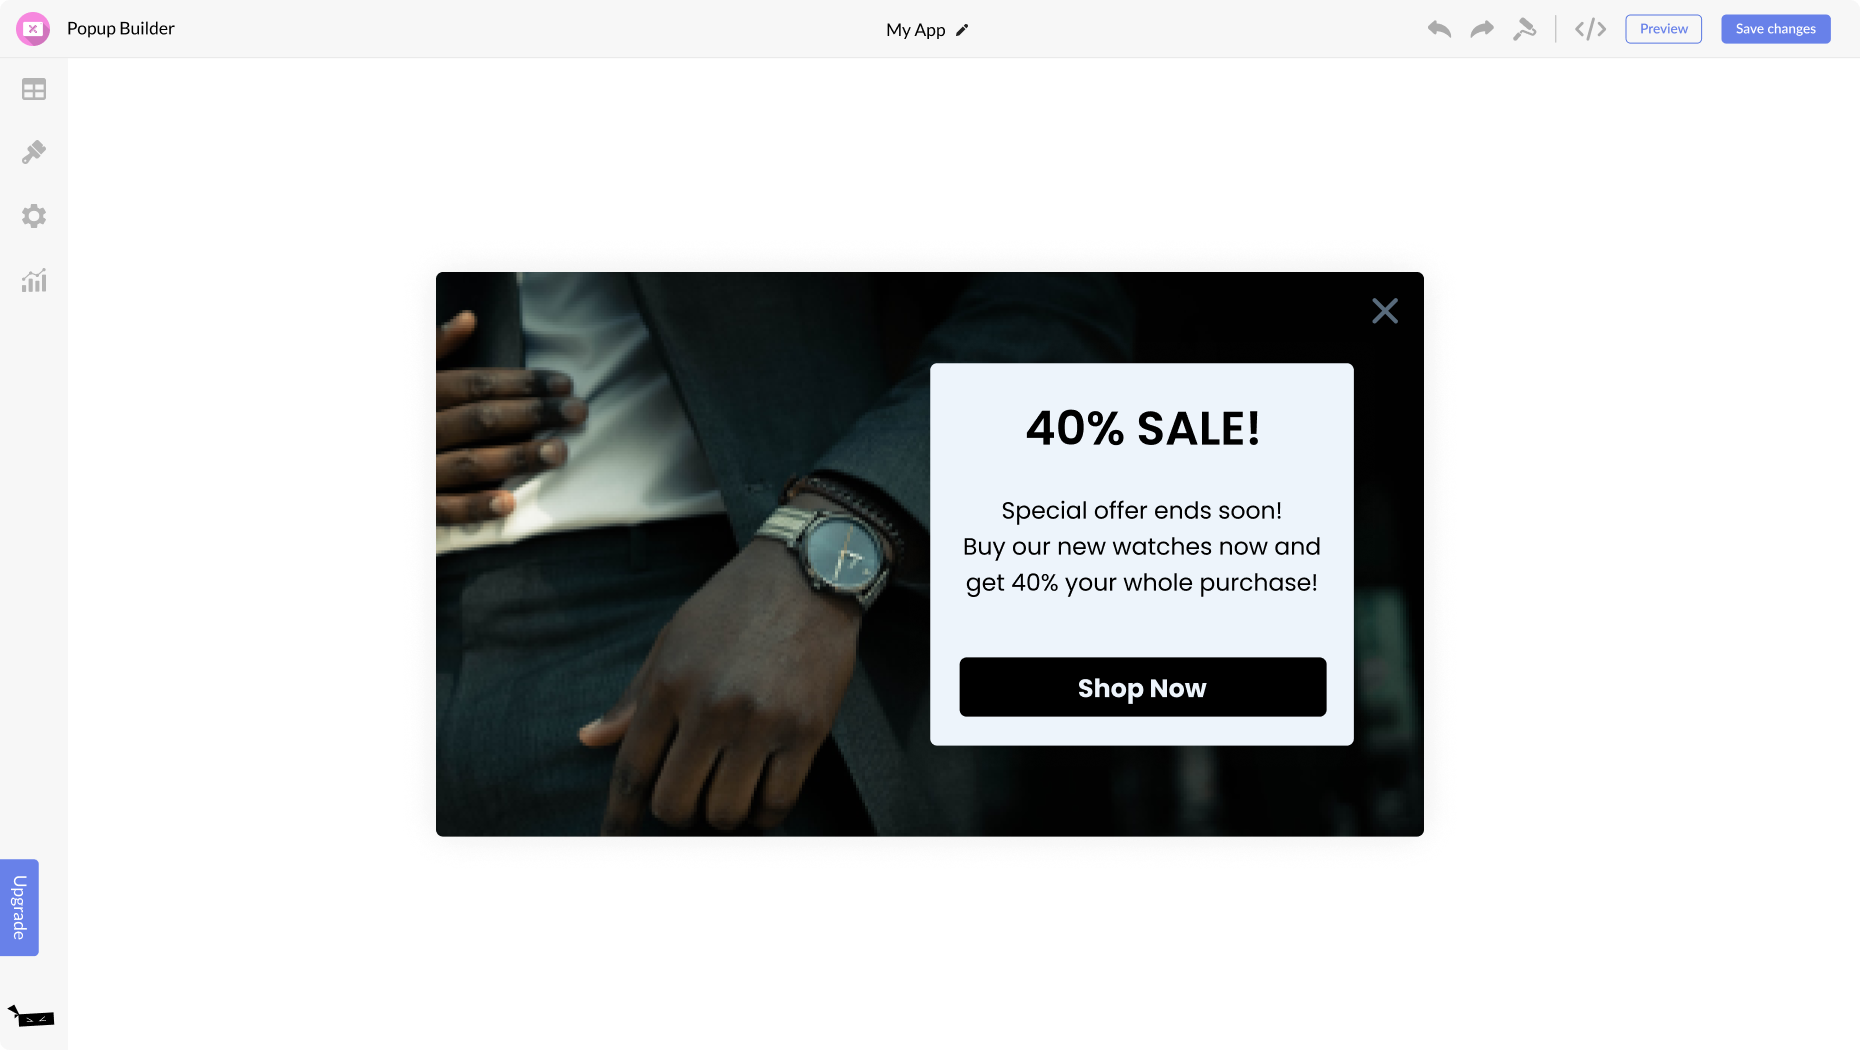 Popup Builder for Sellfy